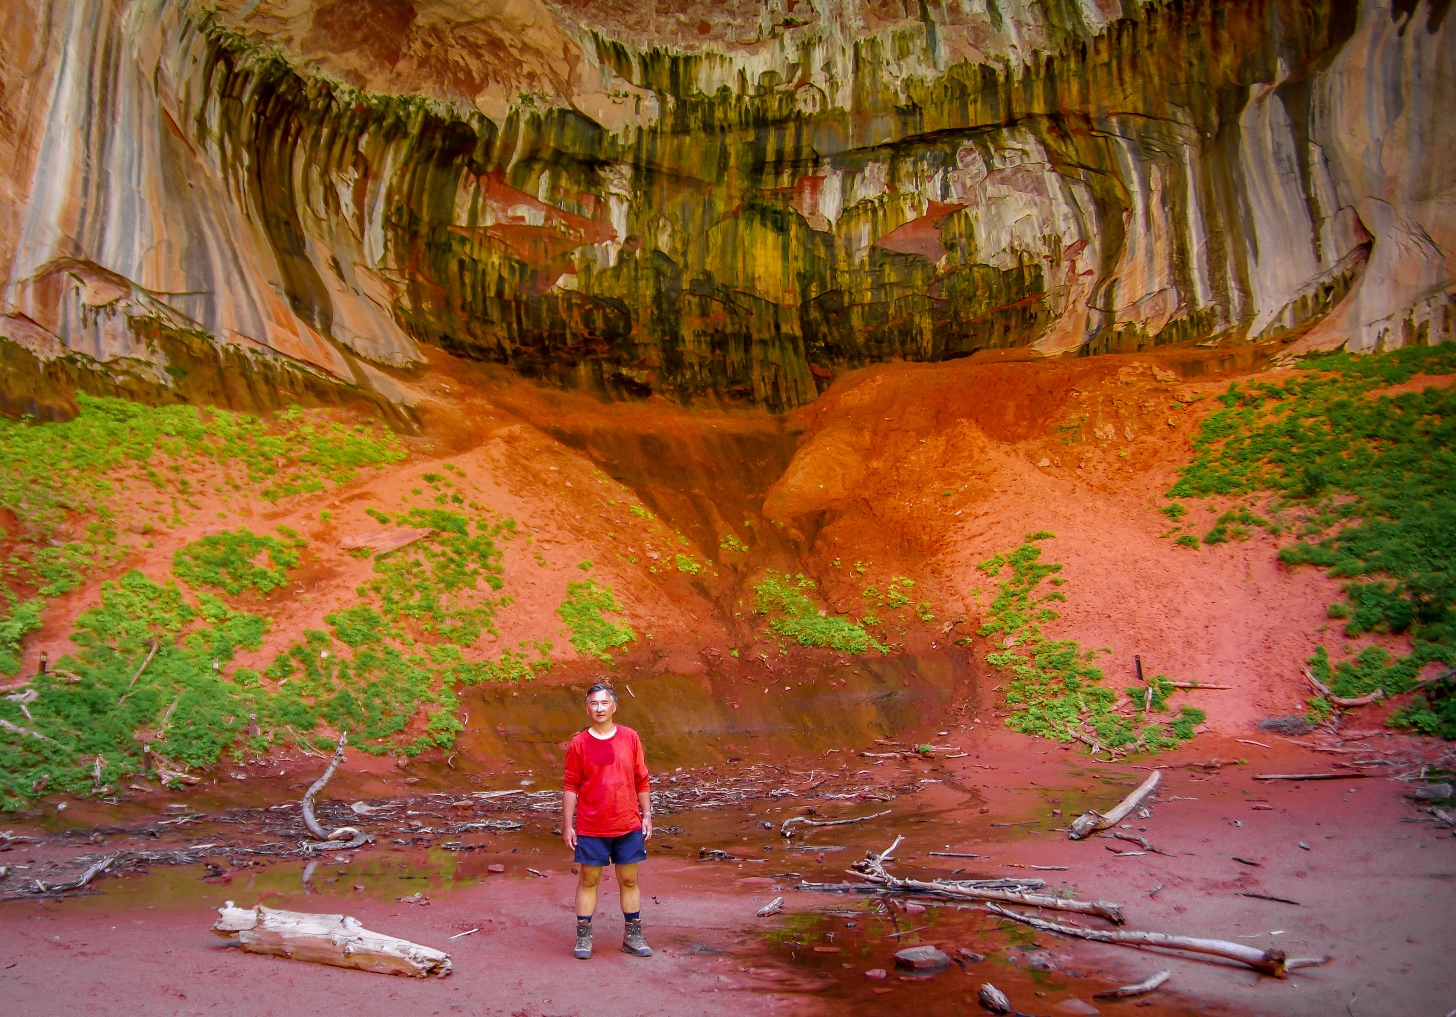 rrasha Under Double Arch Alcove At The End Of Taylor Creek Trail In Kolob Canyons Section Of Zion National Park, UT